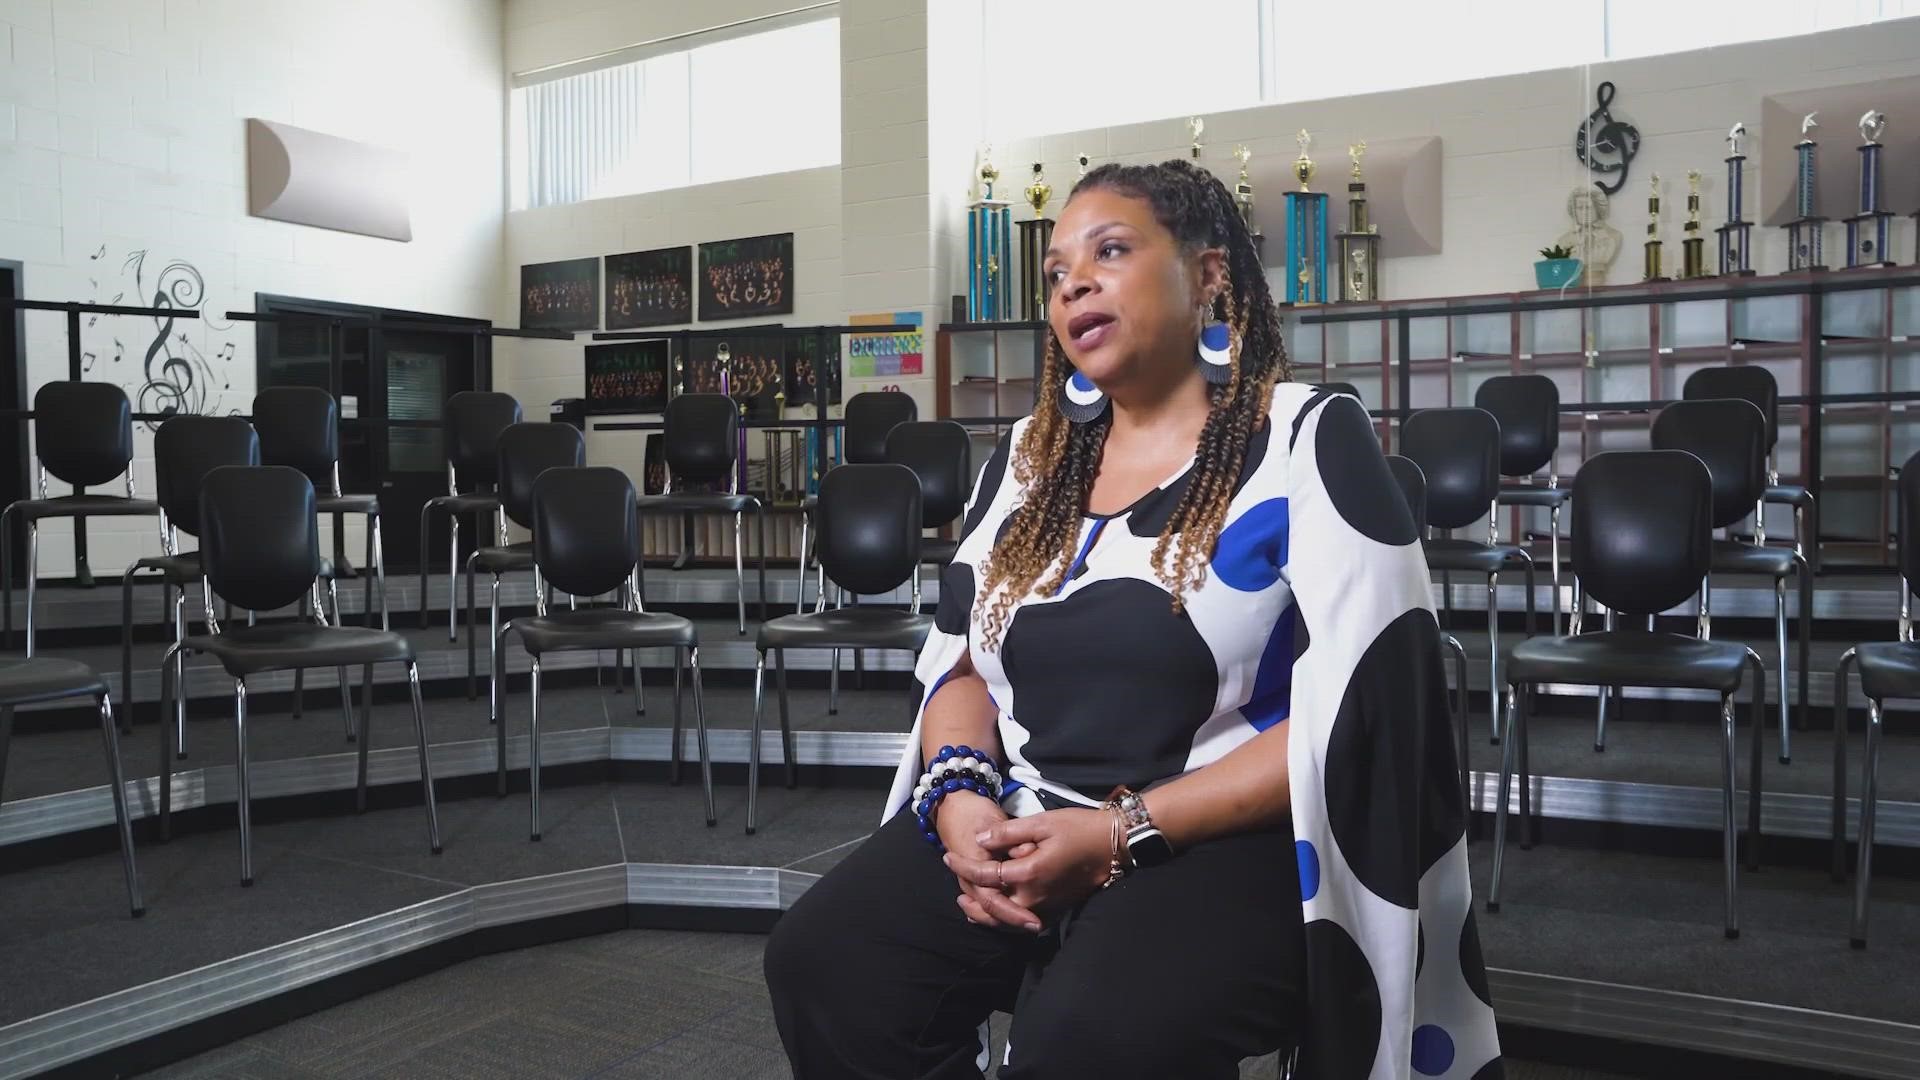 Nominated for the second time in three years, Ms. Pamela Dawson received the 2023 Grammy Music Educator Award.